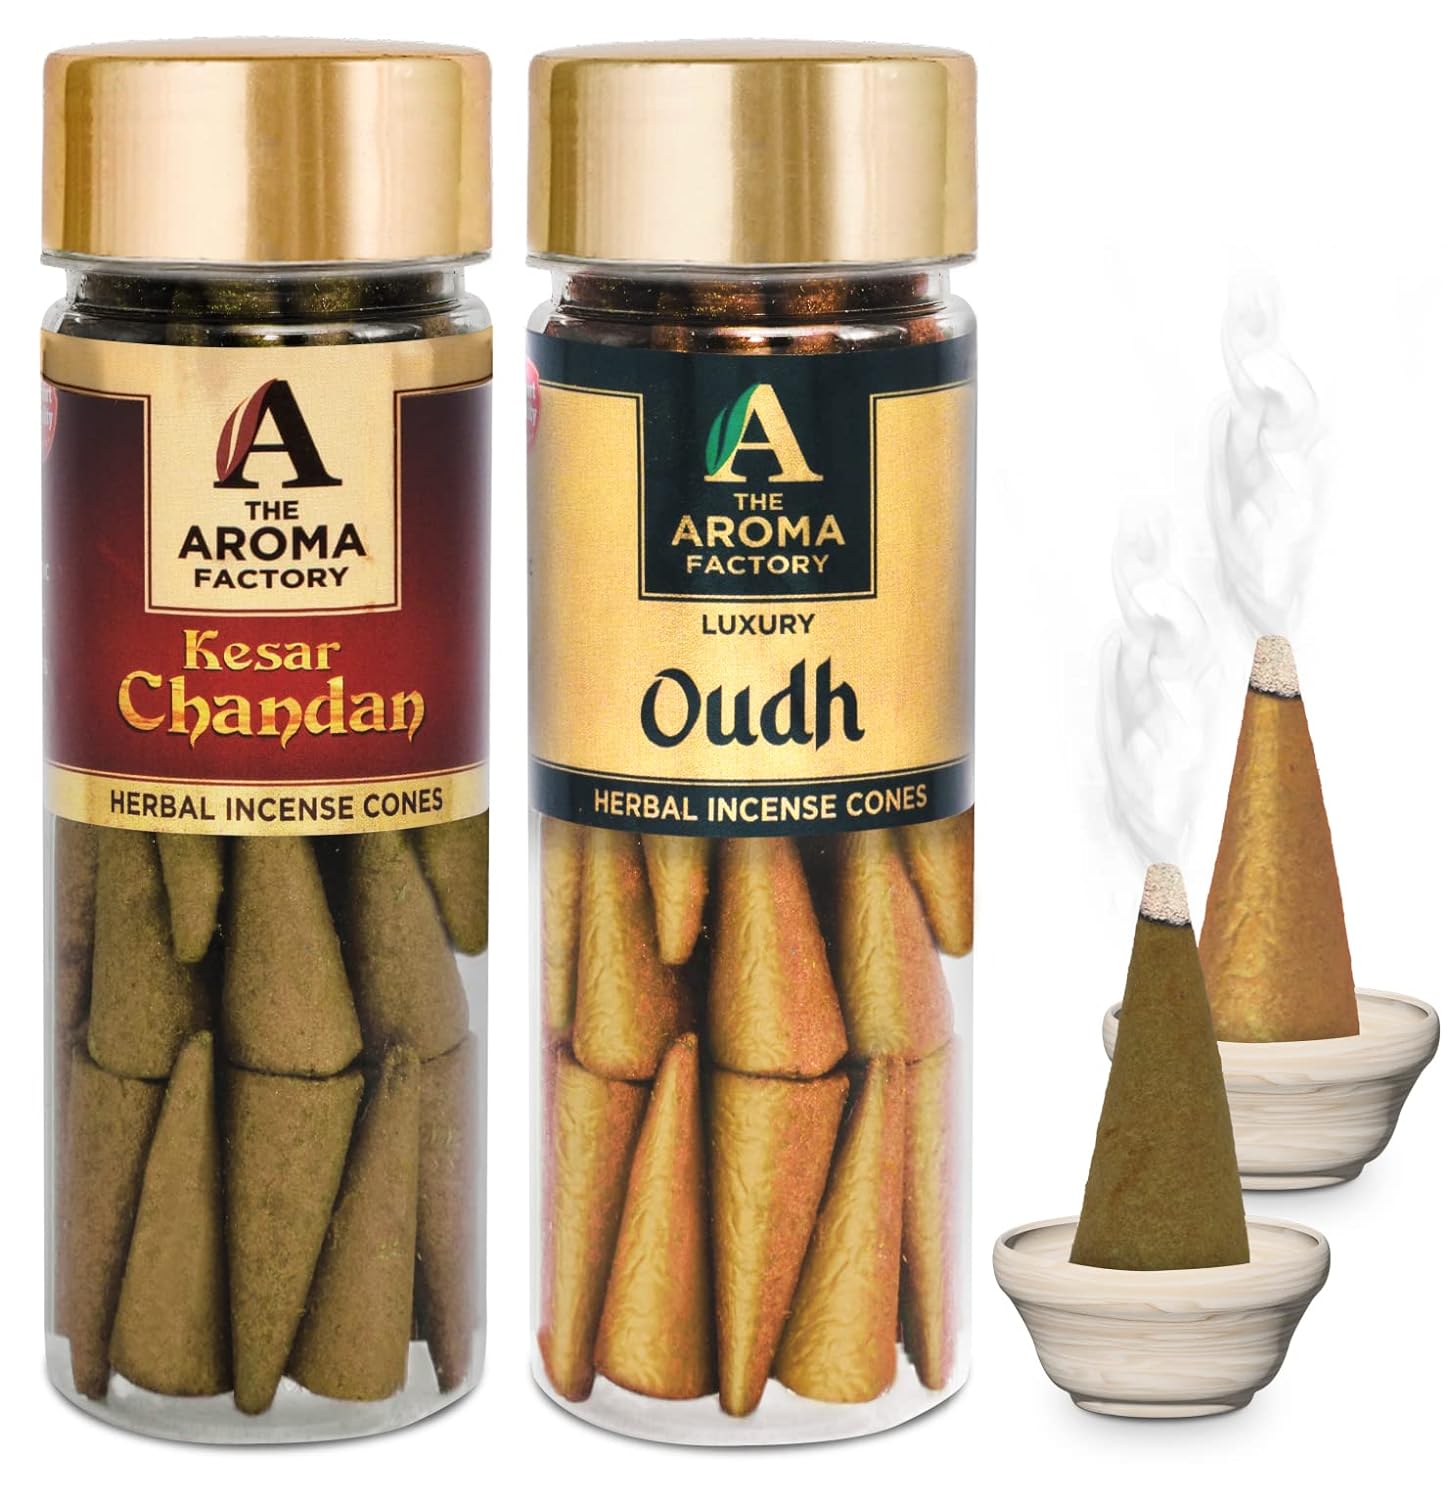 The Aroma Factory Incense Dhoop Cone for Puja, Kesar Chandan & Oudh (100% Herbal & 0% Charcoal) 2 Bottles x 30 Cones